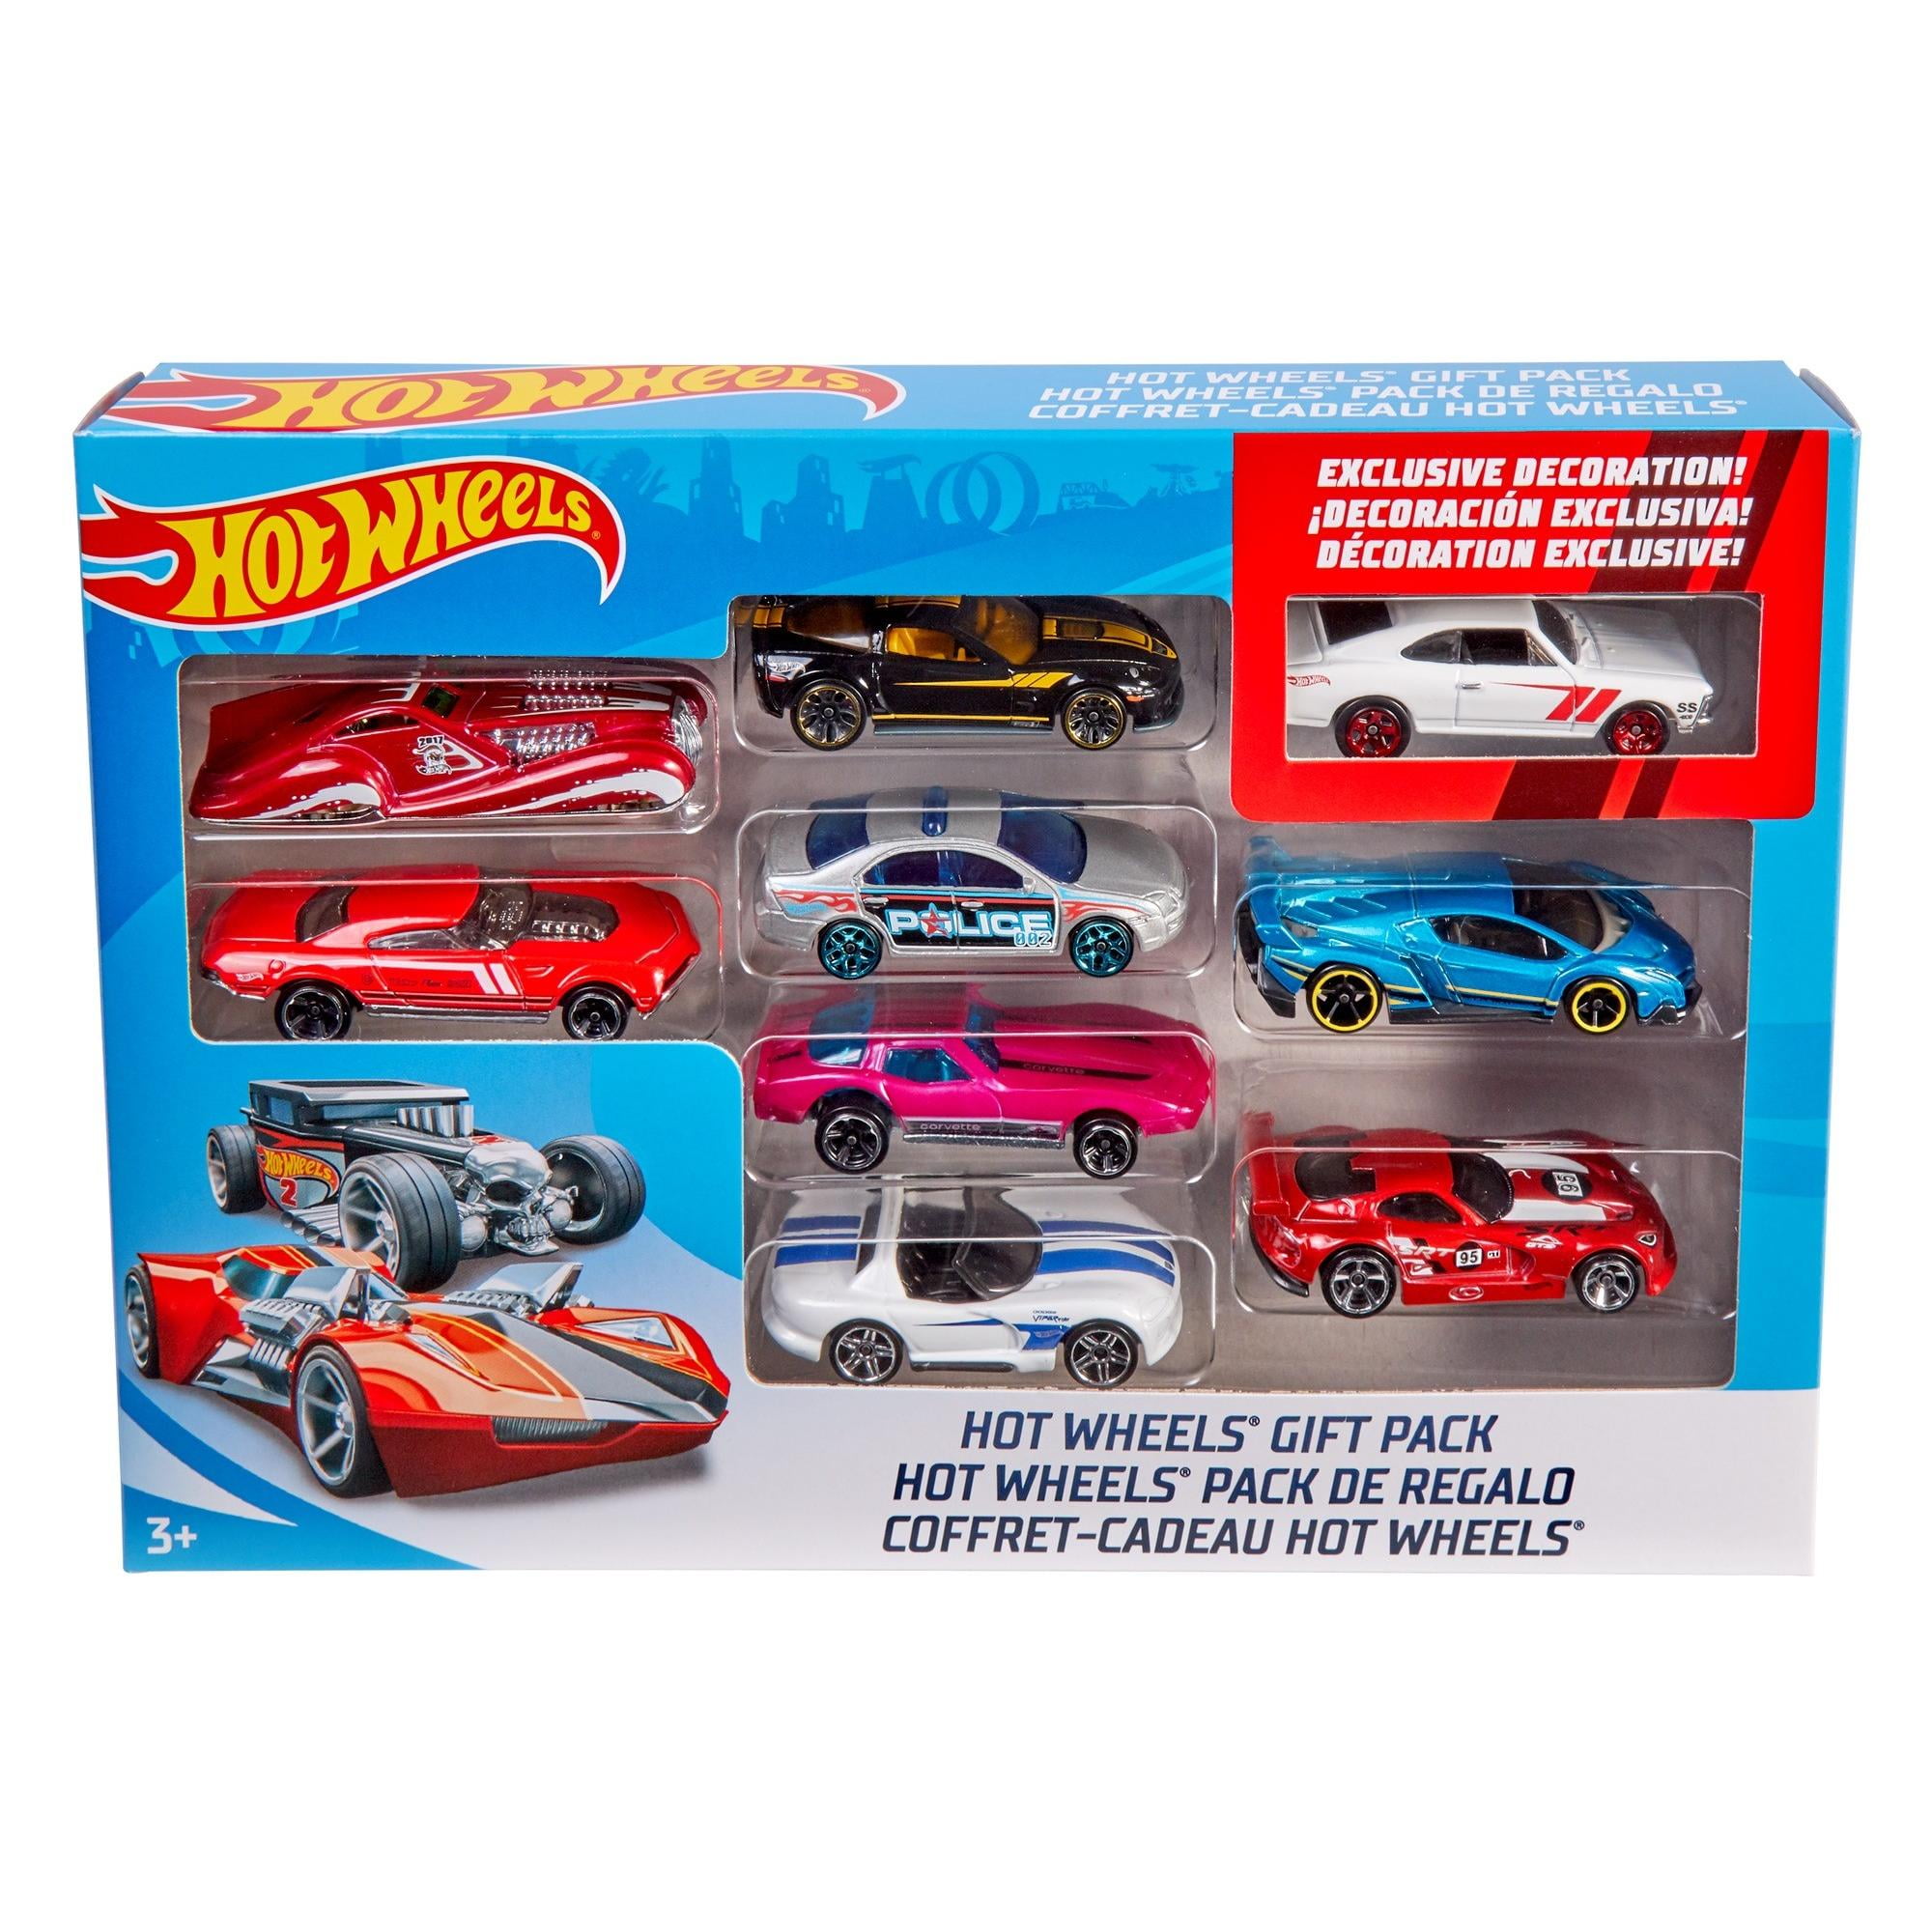 Hot Wheels CGN22 1:64 Scale Car 50 Pack for sale online 